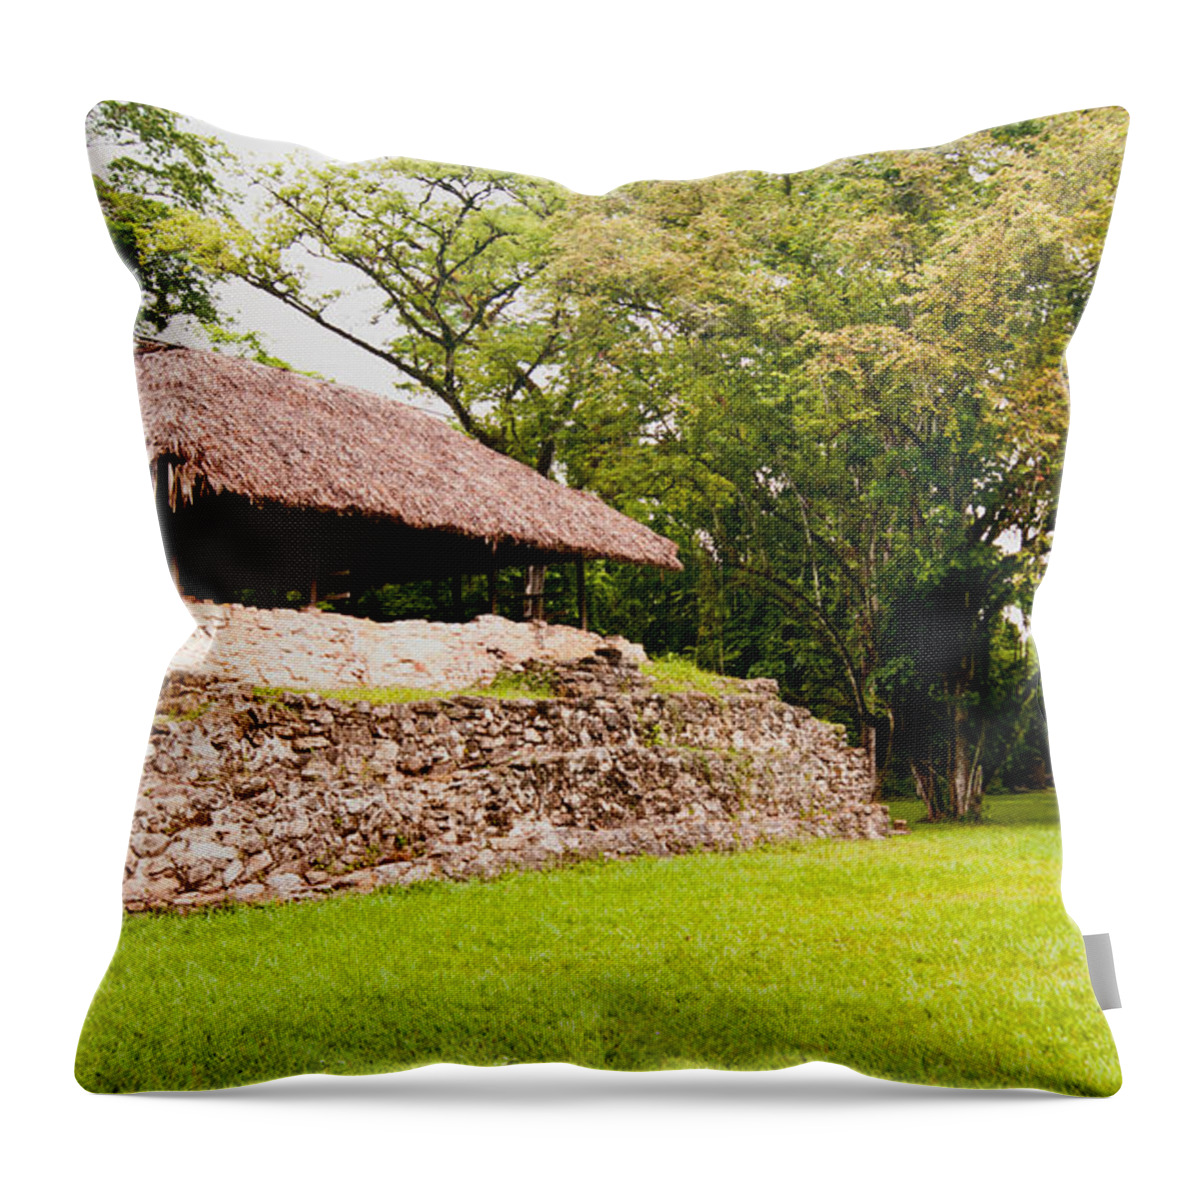  Throw Pillow featuring the photograph Mayan City Bldg by James Gay